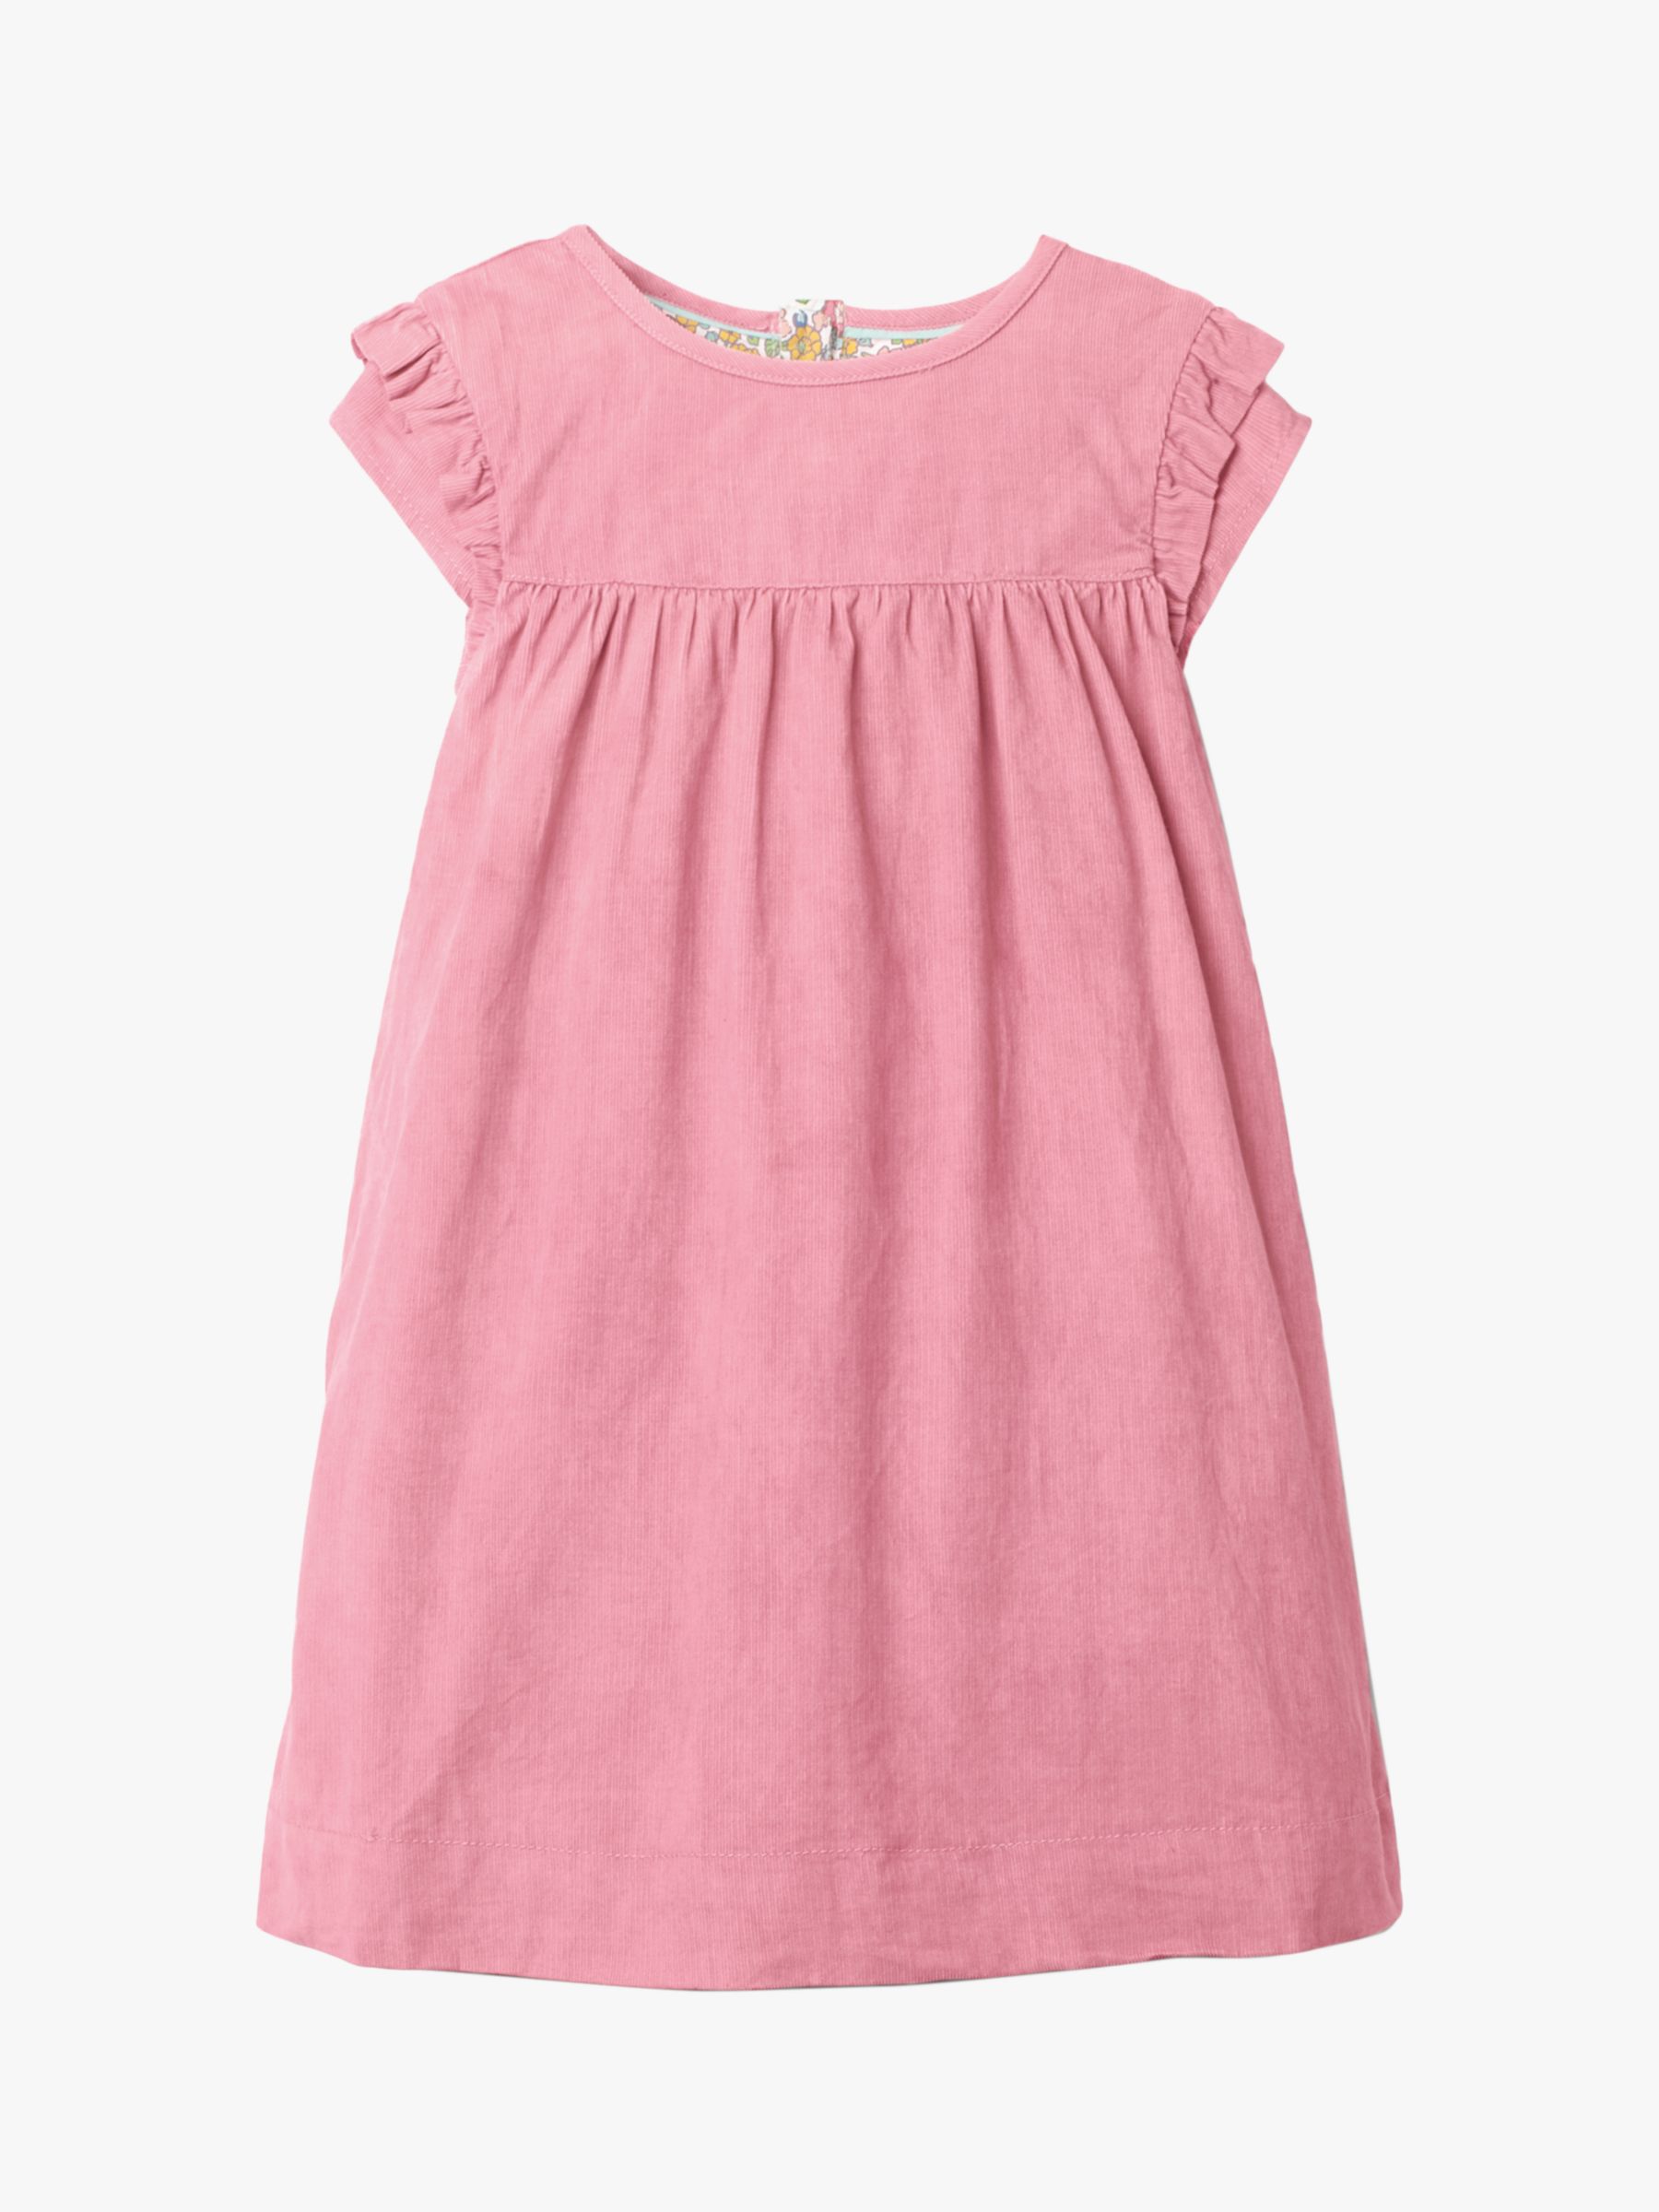 Mini Boden Kids' Easy Day Dress, Formica Pink at John Lewis & Partners